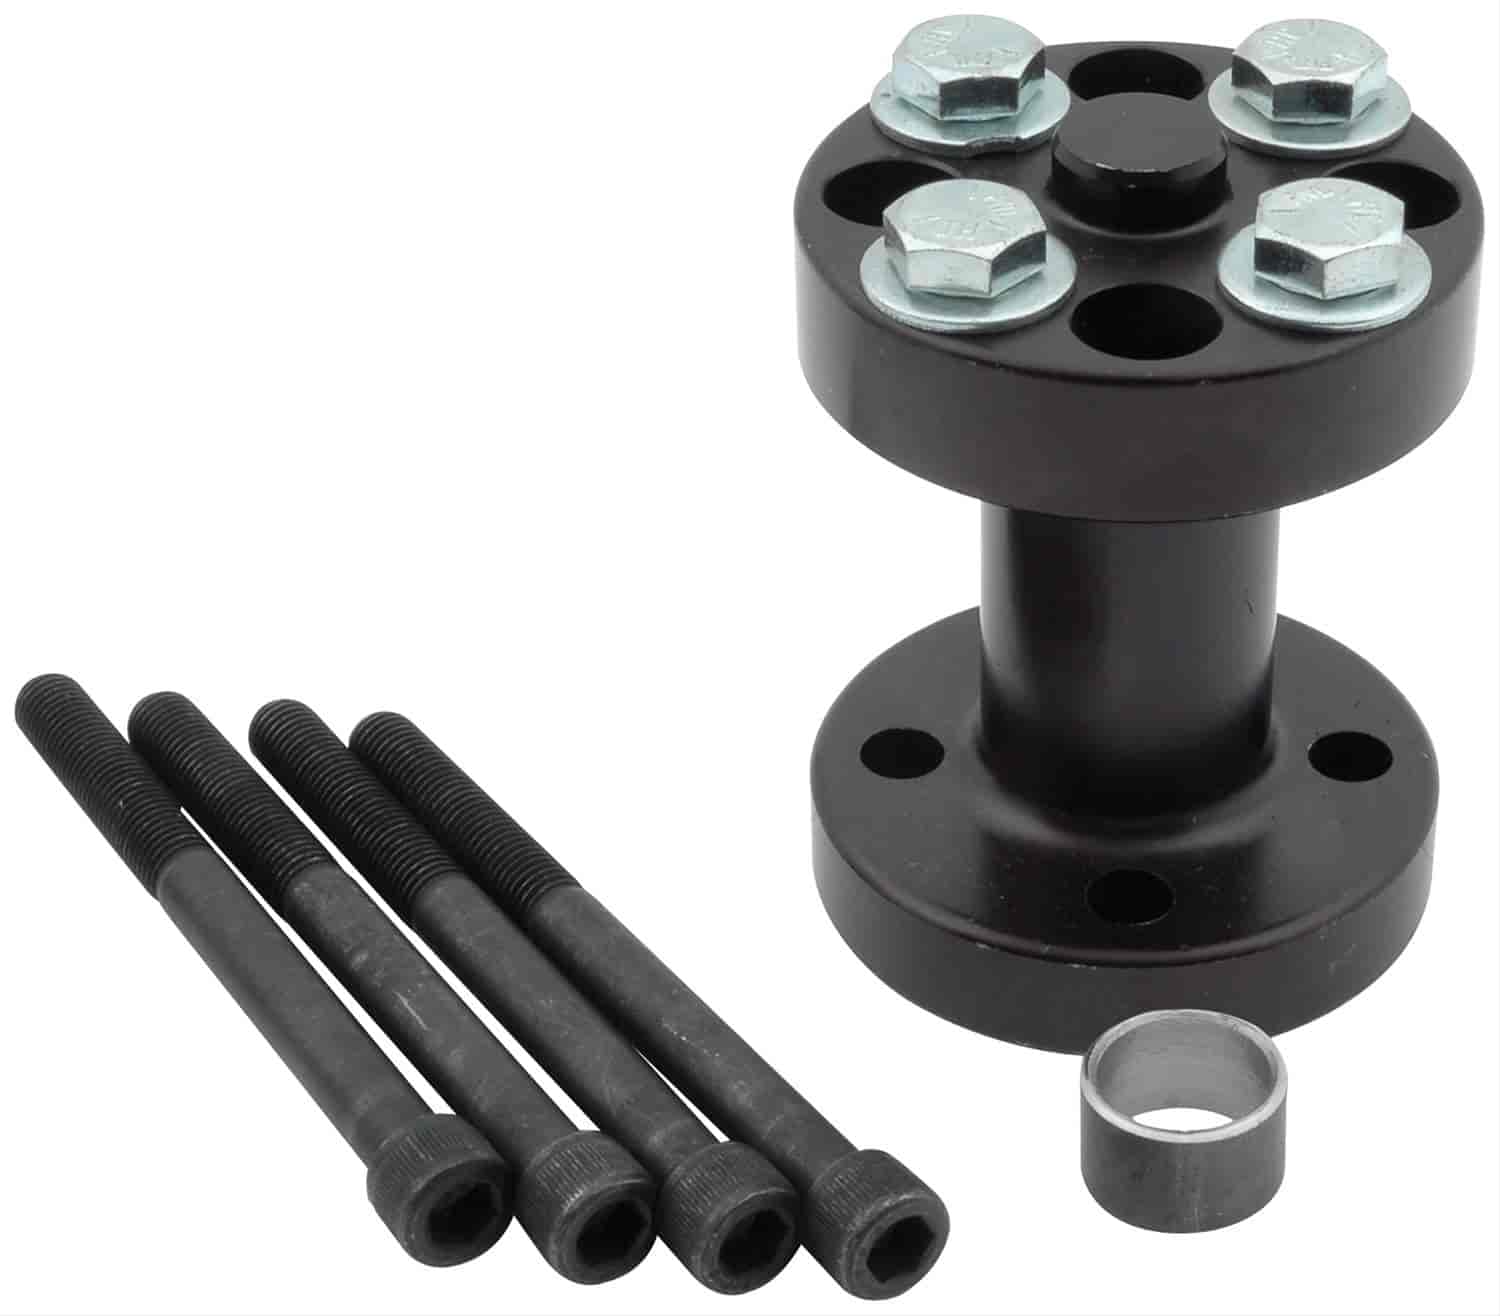 Aluminum Fan Spacer Kit 2-1/2" Spaced *Note: Spacers work with 1-3/4" bolt circle flanges only.